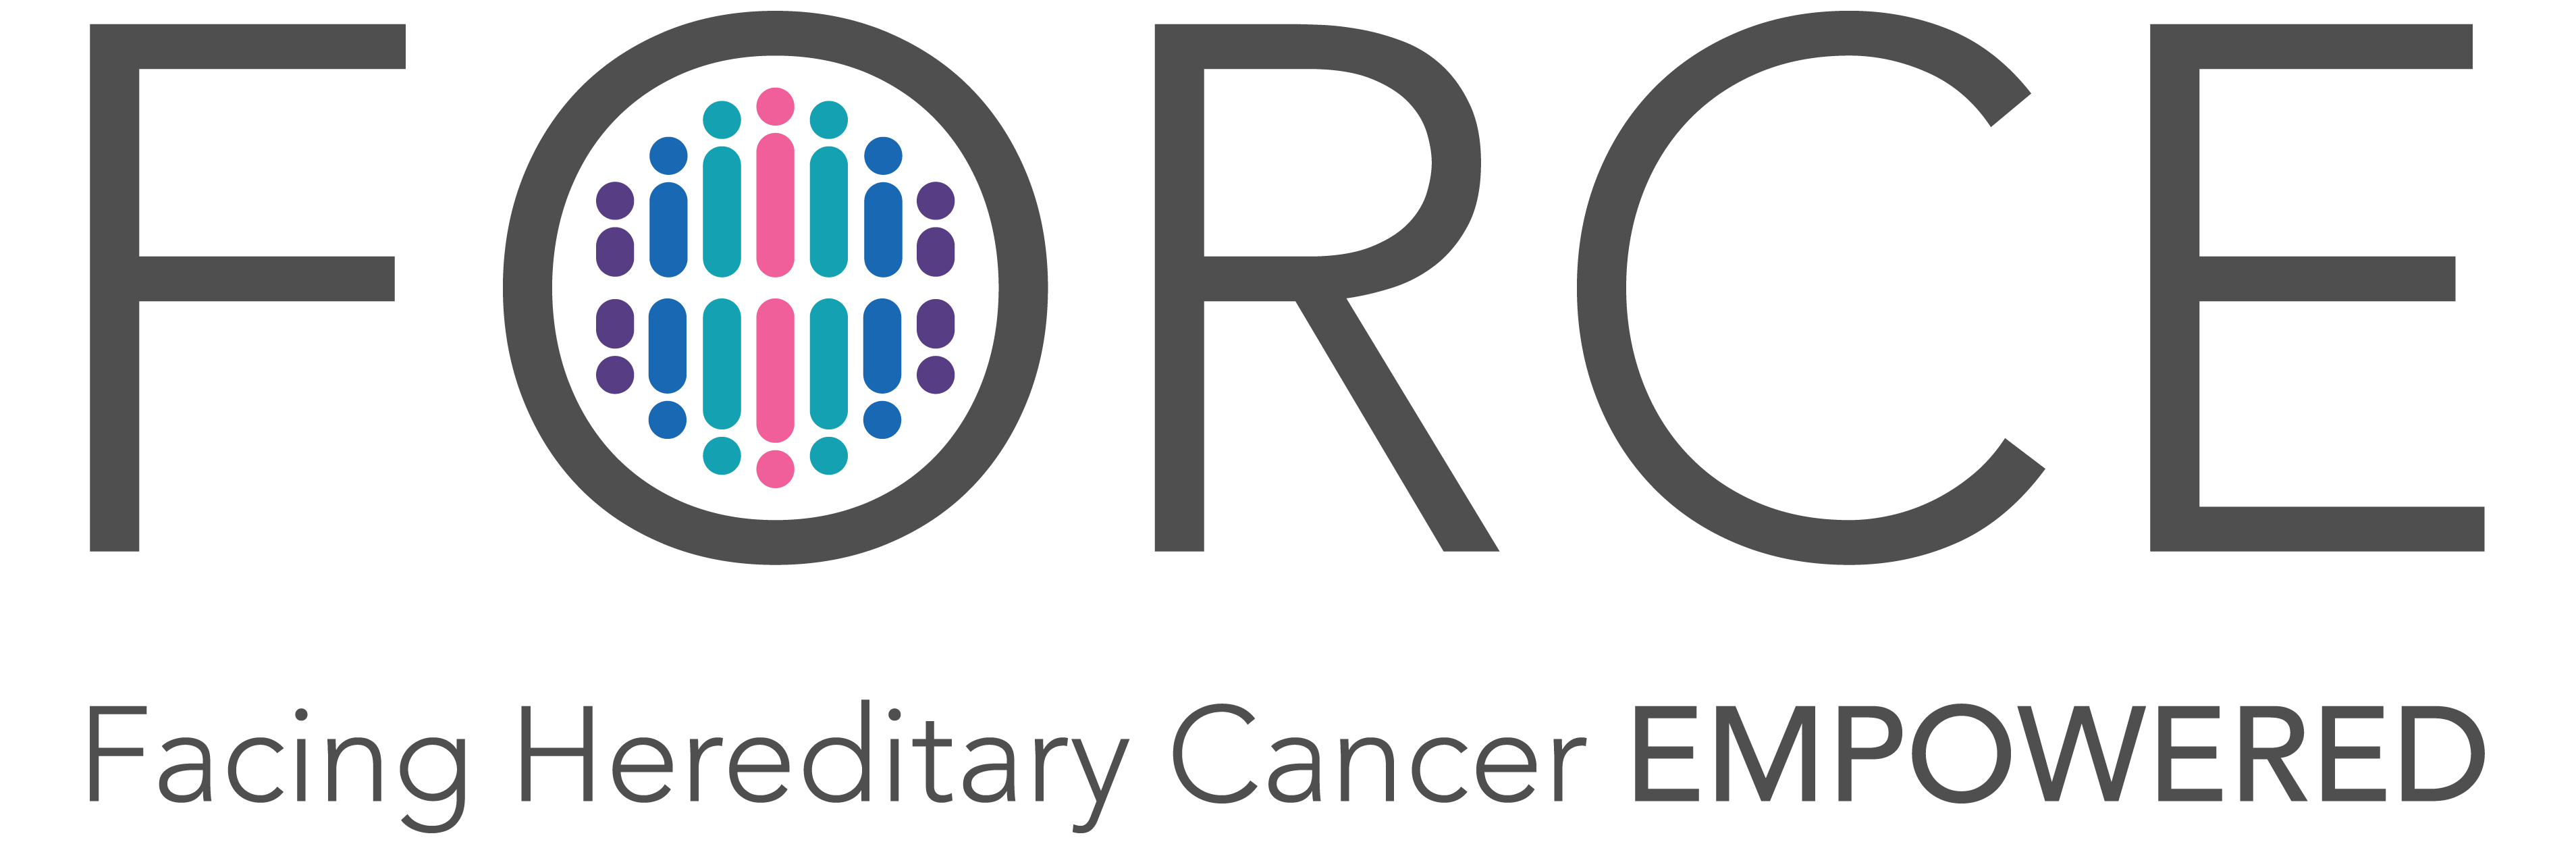 FORCE Expands to Provide Support for Anyone Impacted by Hereditary Cancer